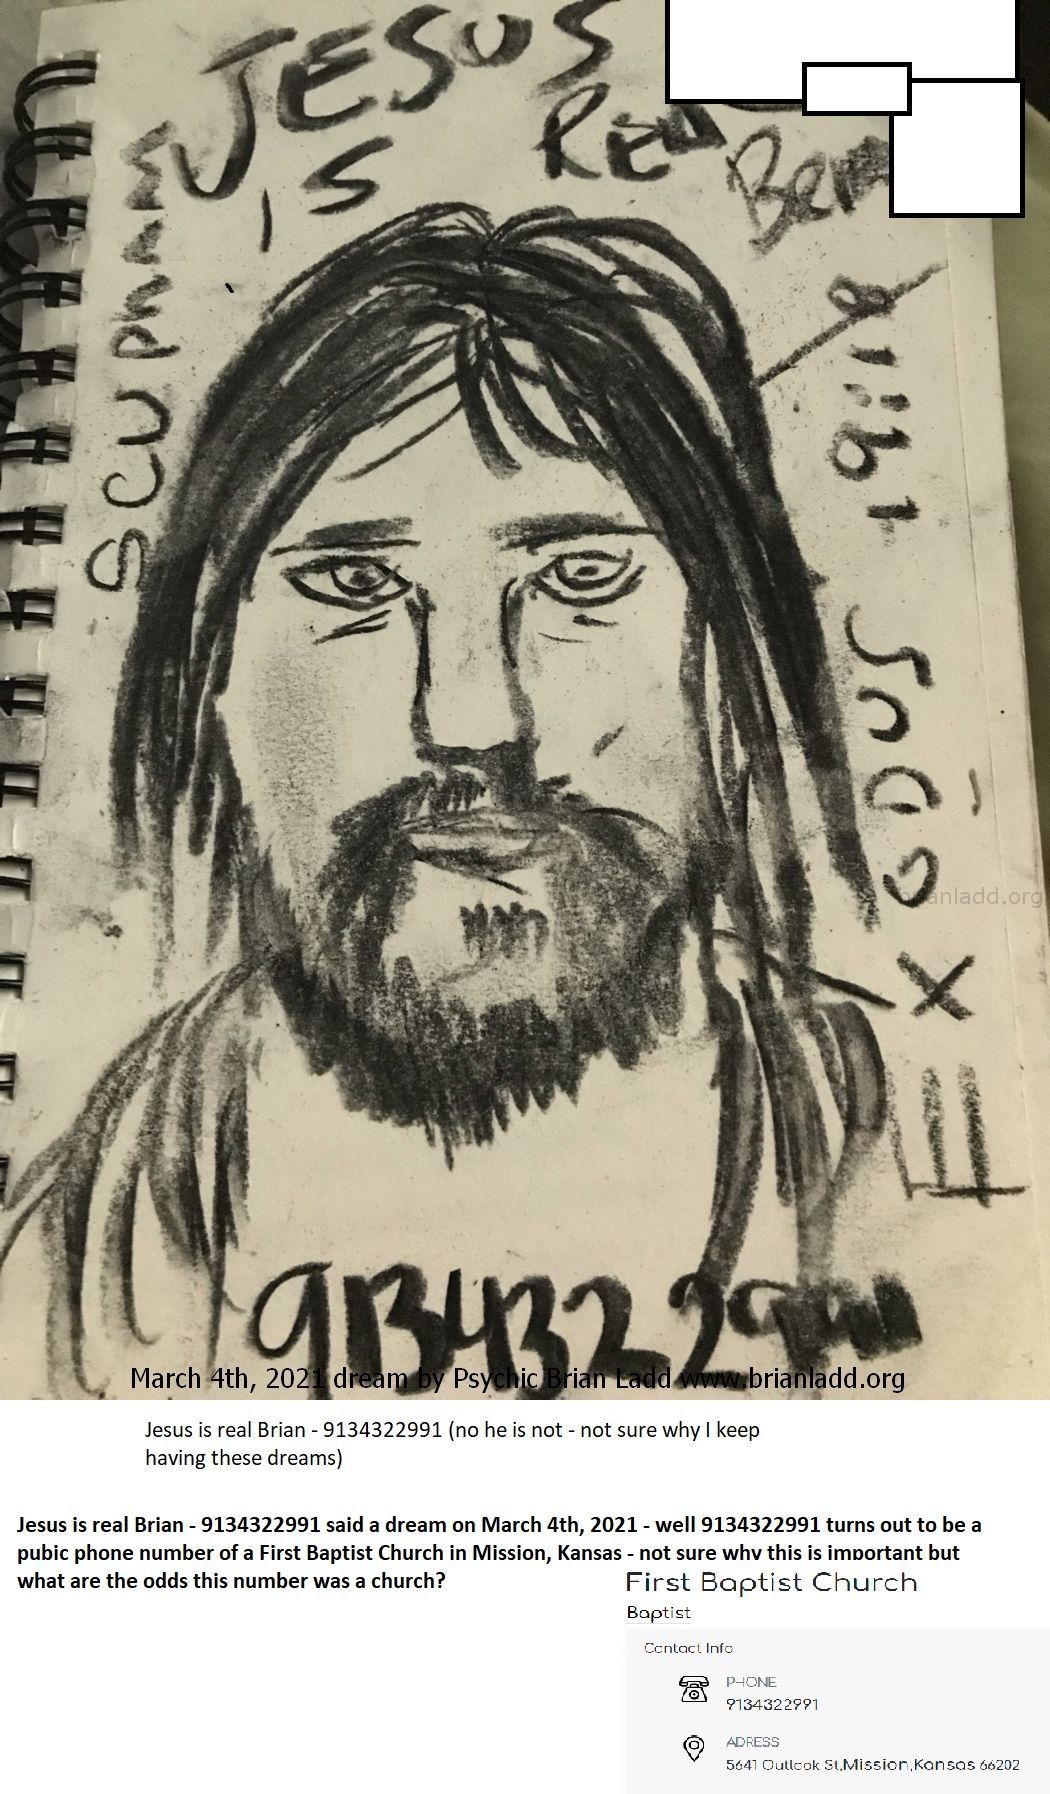 Jesus Is Real Brian 9134322991 Said A Dream On March 4Th  2021 Well 9134322991 Turns Out To Be A Pubic Phone Number Of A...
Jesus Is Real Brian - 9134322991 Said A Dream On March 4th, 2021 - Well 9134322991 Turns Out To Be A Pubic Phone Number Of A First Baptist Church In Mission Kansas - Not Sure Why This Is Important But What Are The Odds This Number Was A Church?  More At   https://briansprediction.com/Thumbnails.Php?Album=2903
